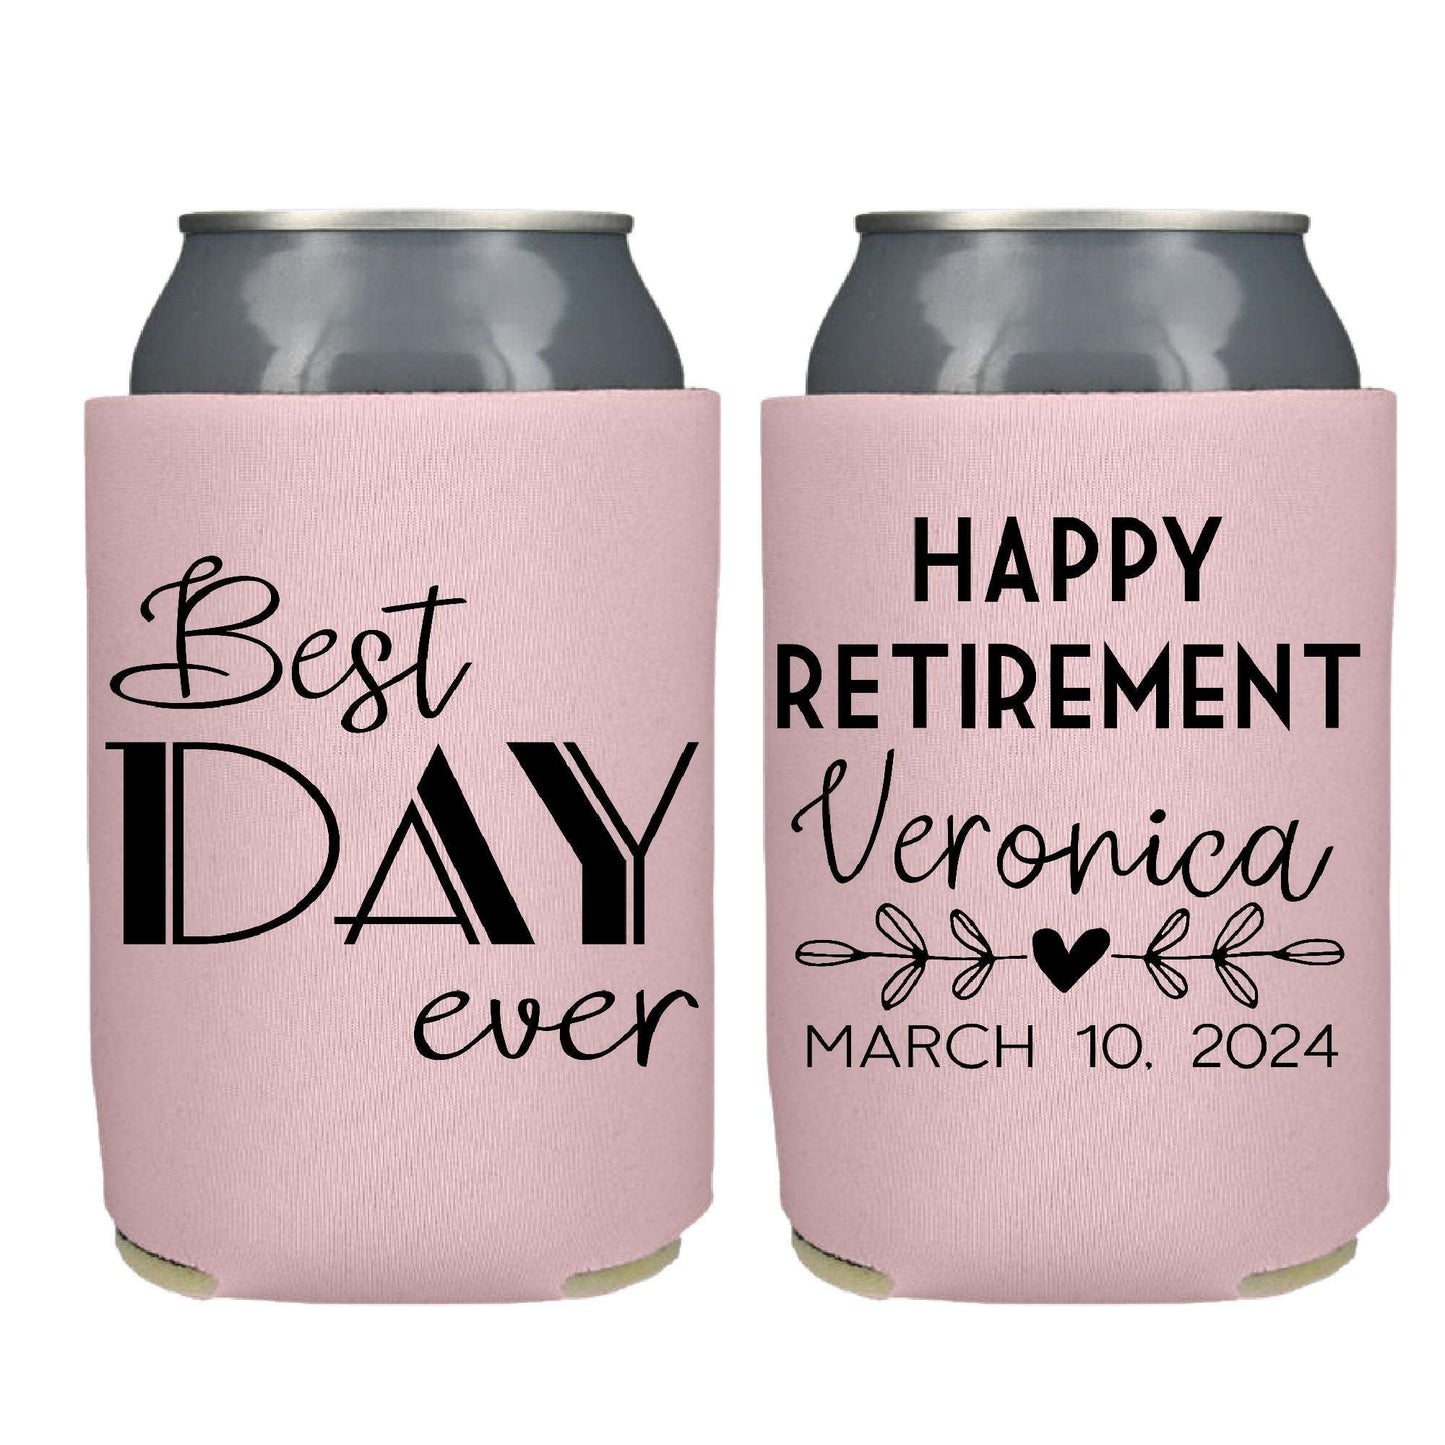 Best Day Ever Retirement Screen printed Can Cooler